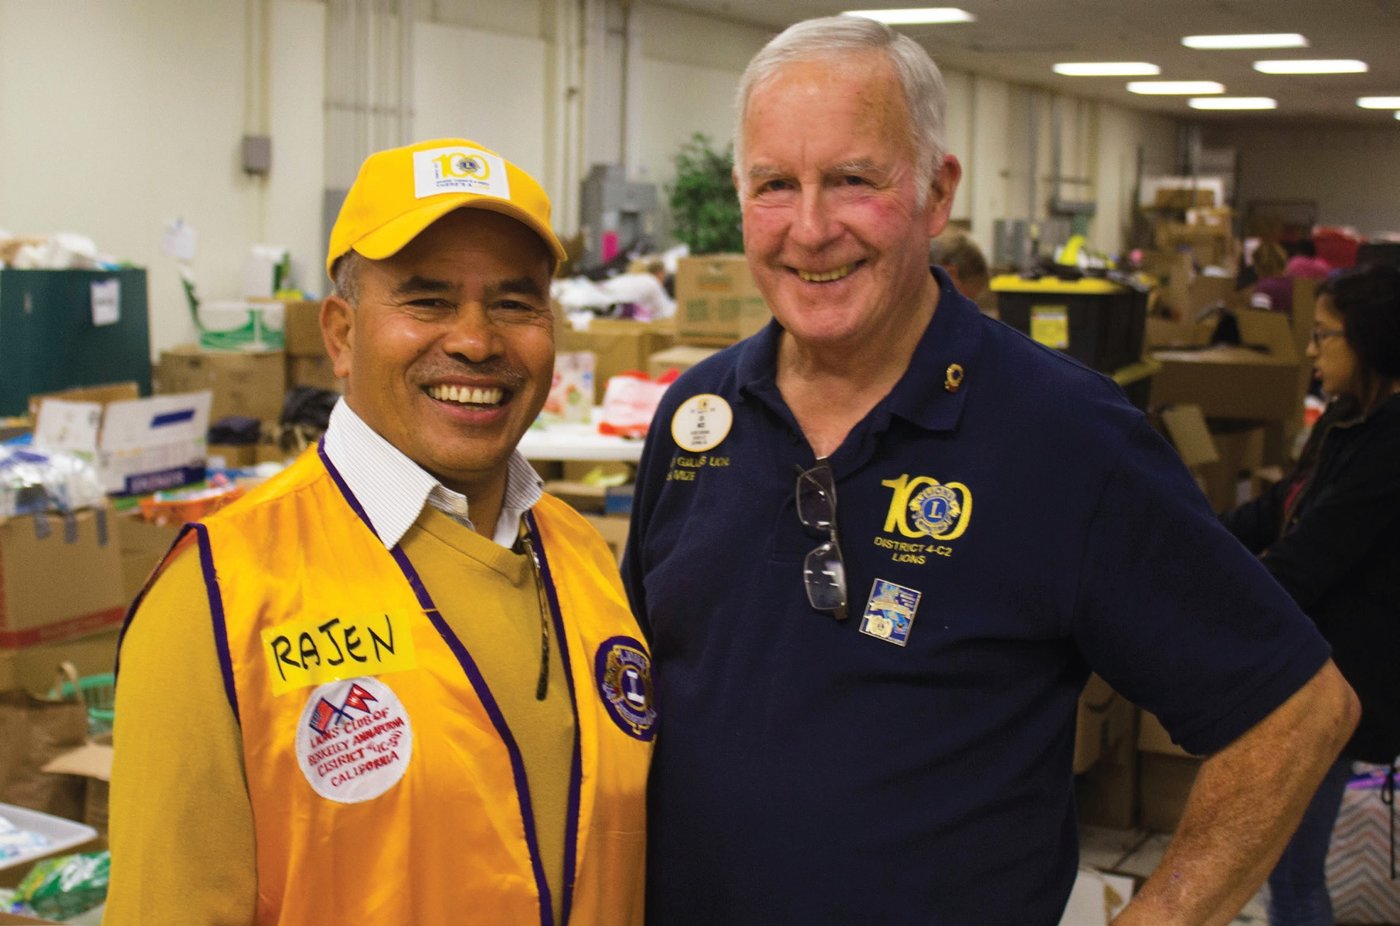 Rajen Thapa, left, with then Lions District Governor of 4-C2 Les Mize help out after the 2017 fires in Santa Rosa, California. As a young boy in Nepal, Thapa dreamed of getting all Nepalese children an education. After moving to the U.S. he’s successfully started a Lions movement in the Nepalese community in California, where they’ve built schools to help children connect to their cultural roots. Photo by Katya Cengel.